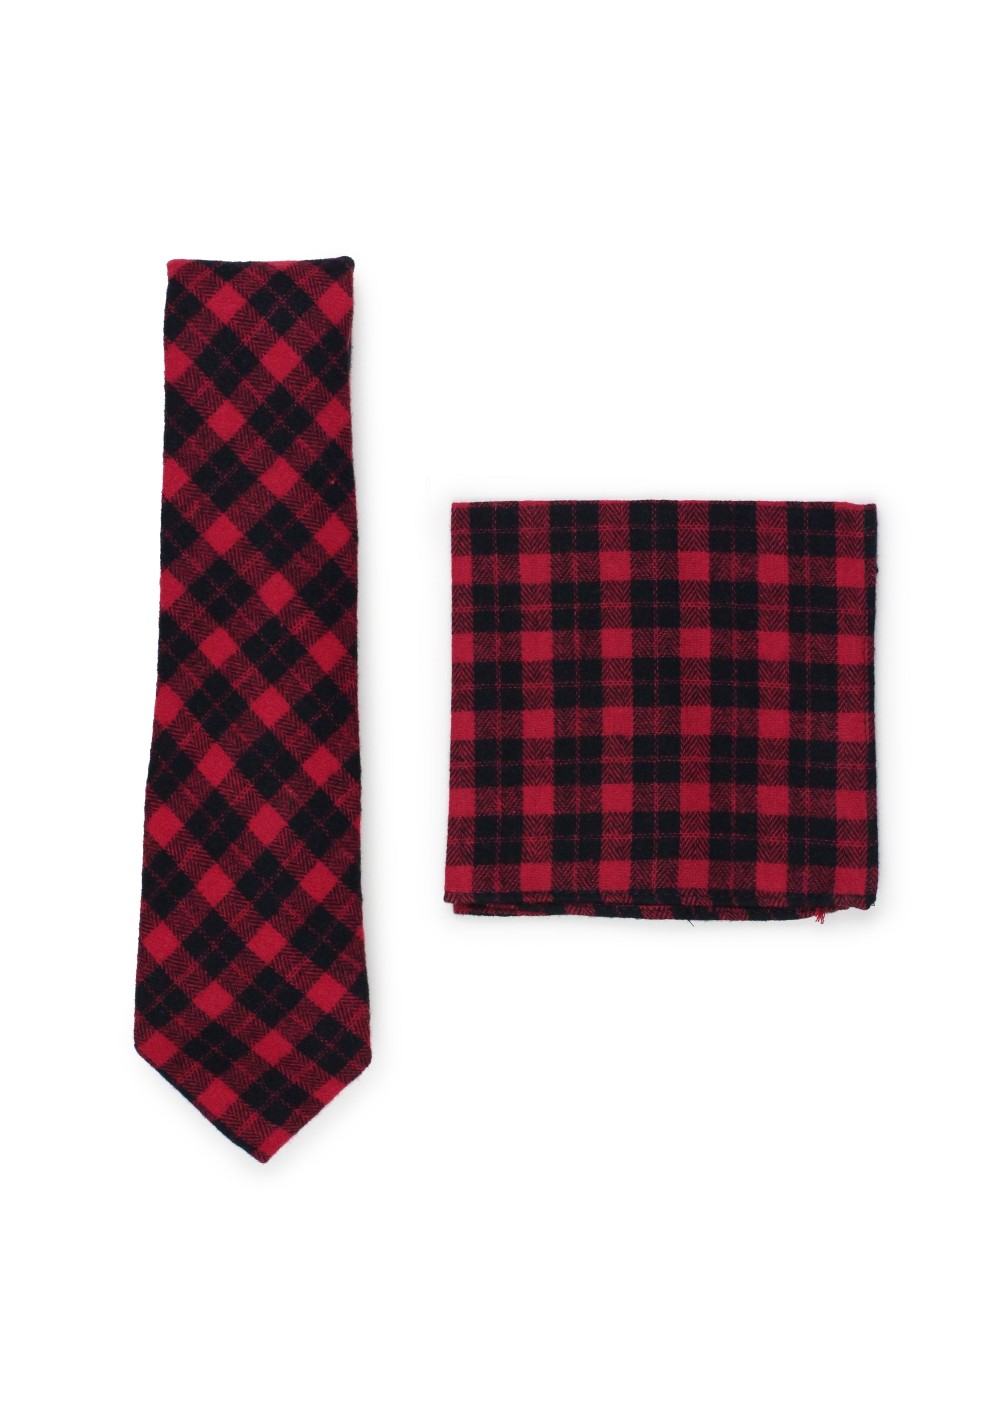 Plaids Checkers Pre-tied Bow tie /& Two Hankies Two Layers 3pc set Burgundy Black